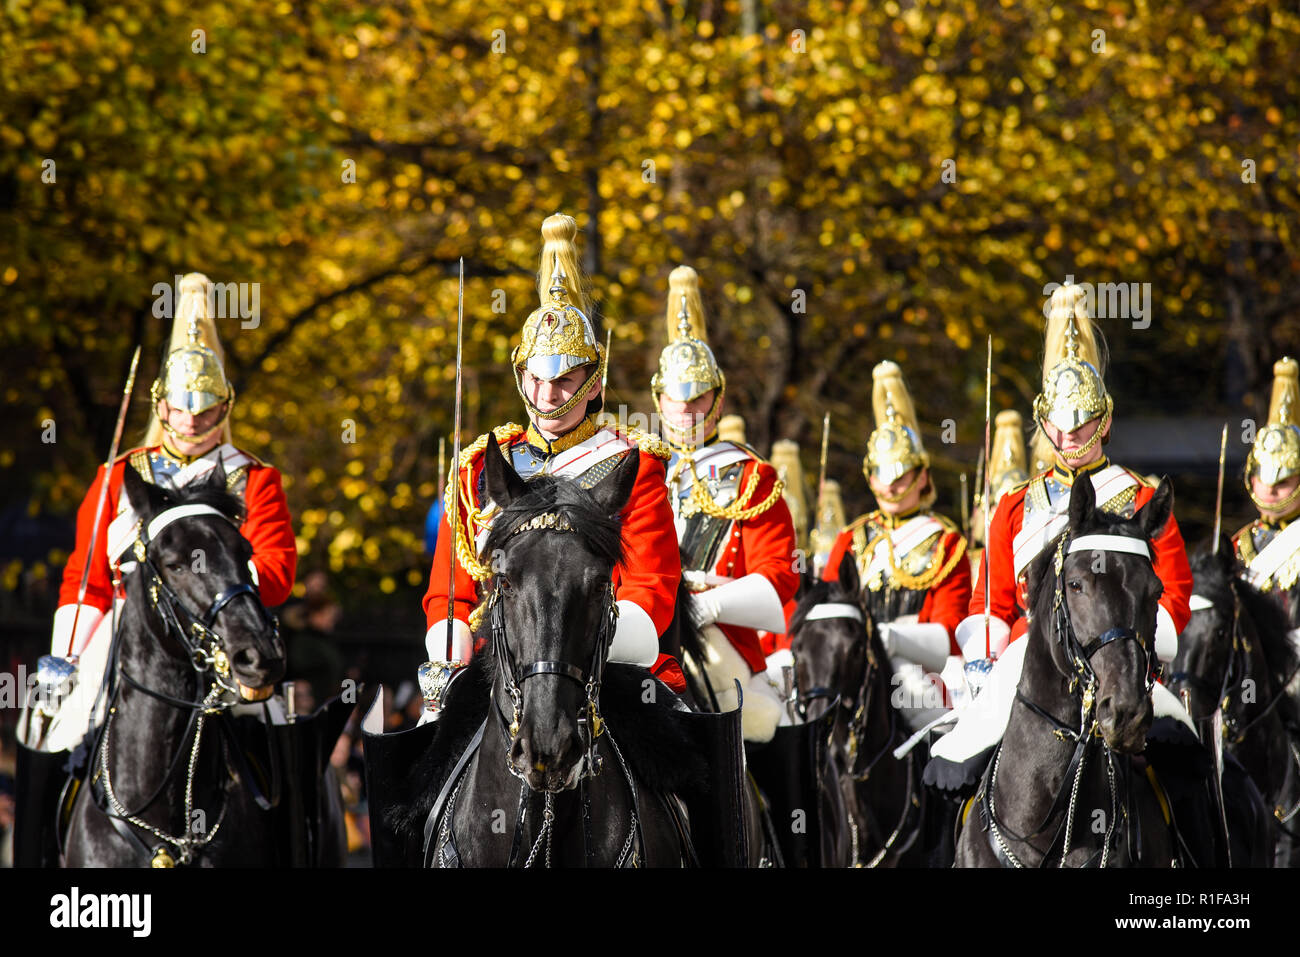 Life Guards of the Household Cavalry Mounted Regiment on horseback at the Lord Mayor's Show Parade, London, UK. Autumn leaves on tree. Fall colors Stock Photo